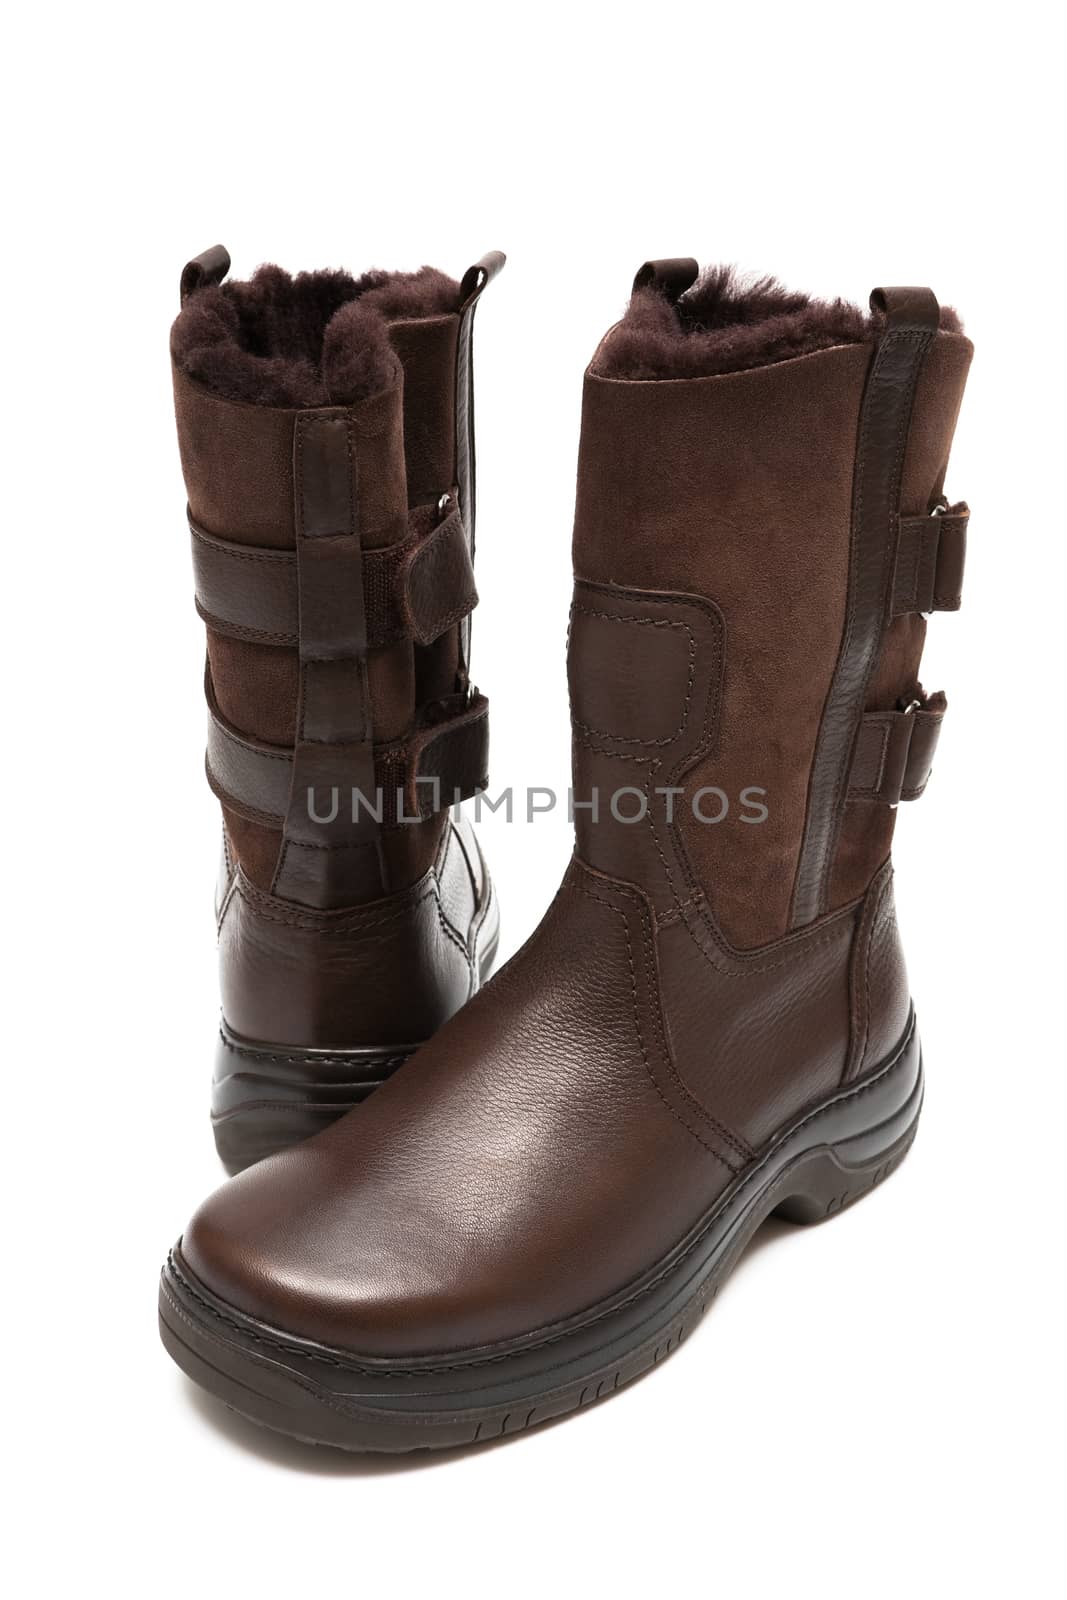 boots for winter by terex